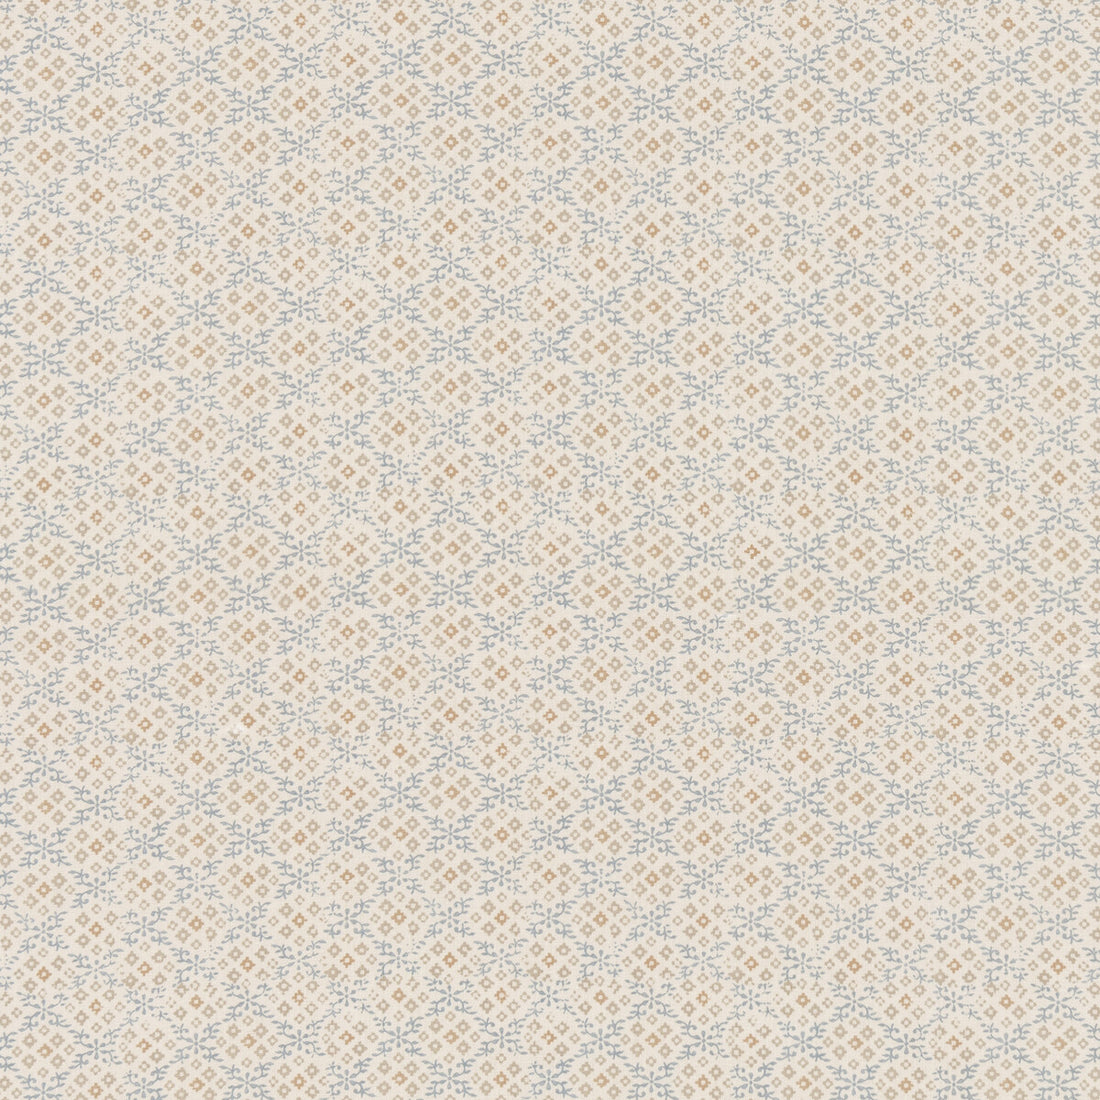 Grantly fabric in blue/sand color - pattern BP11001.5.0 - by G P &amp; J Baker in the House Small Prints collection